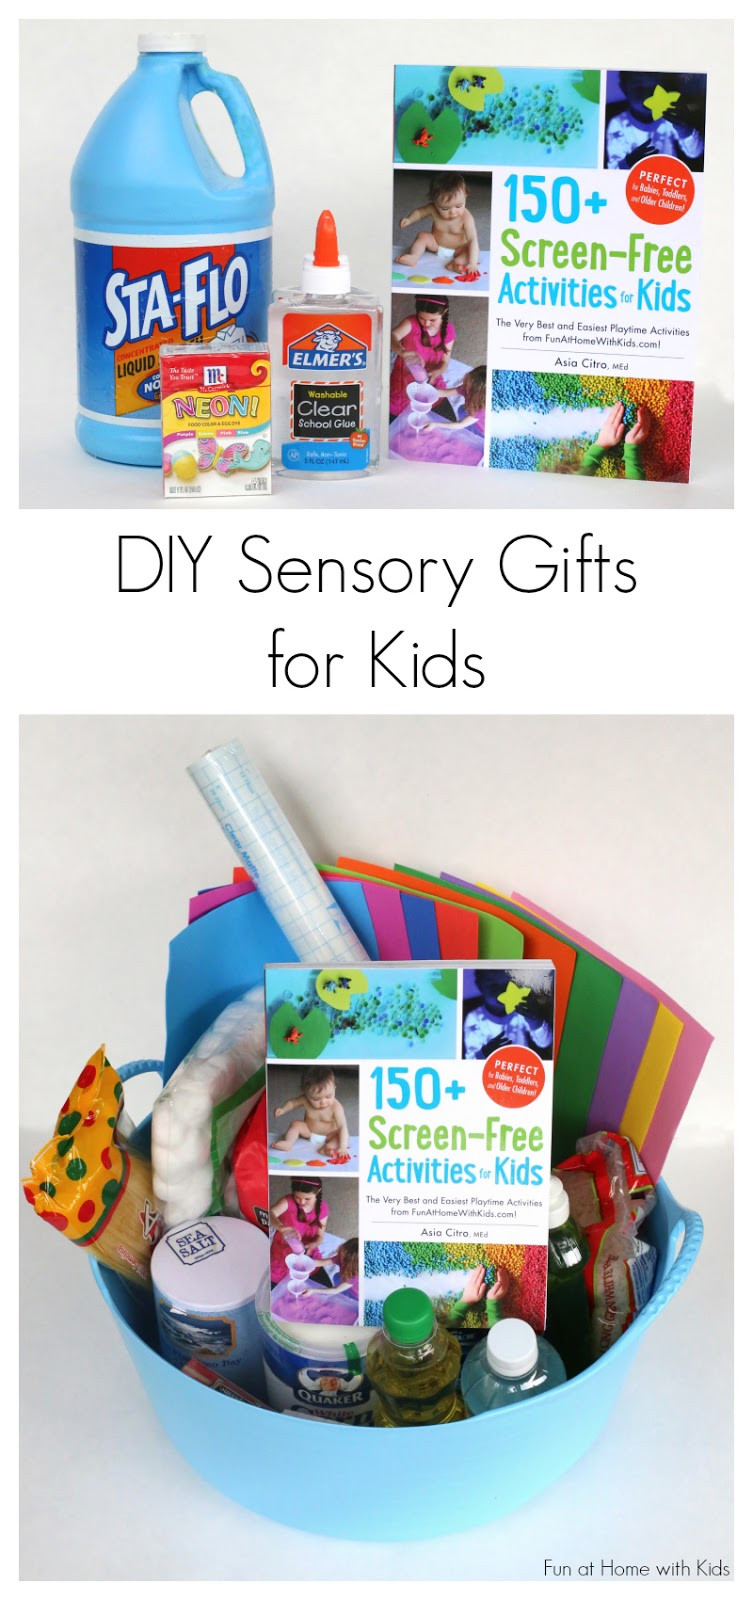 Creative Gifts For Children
 DIY Sensory Kits Creative Gifts for Kids